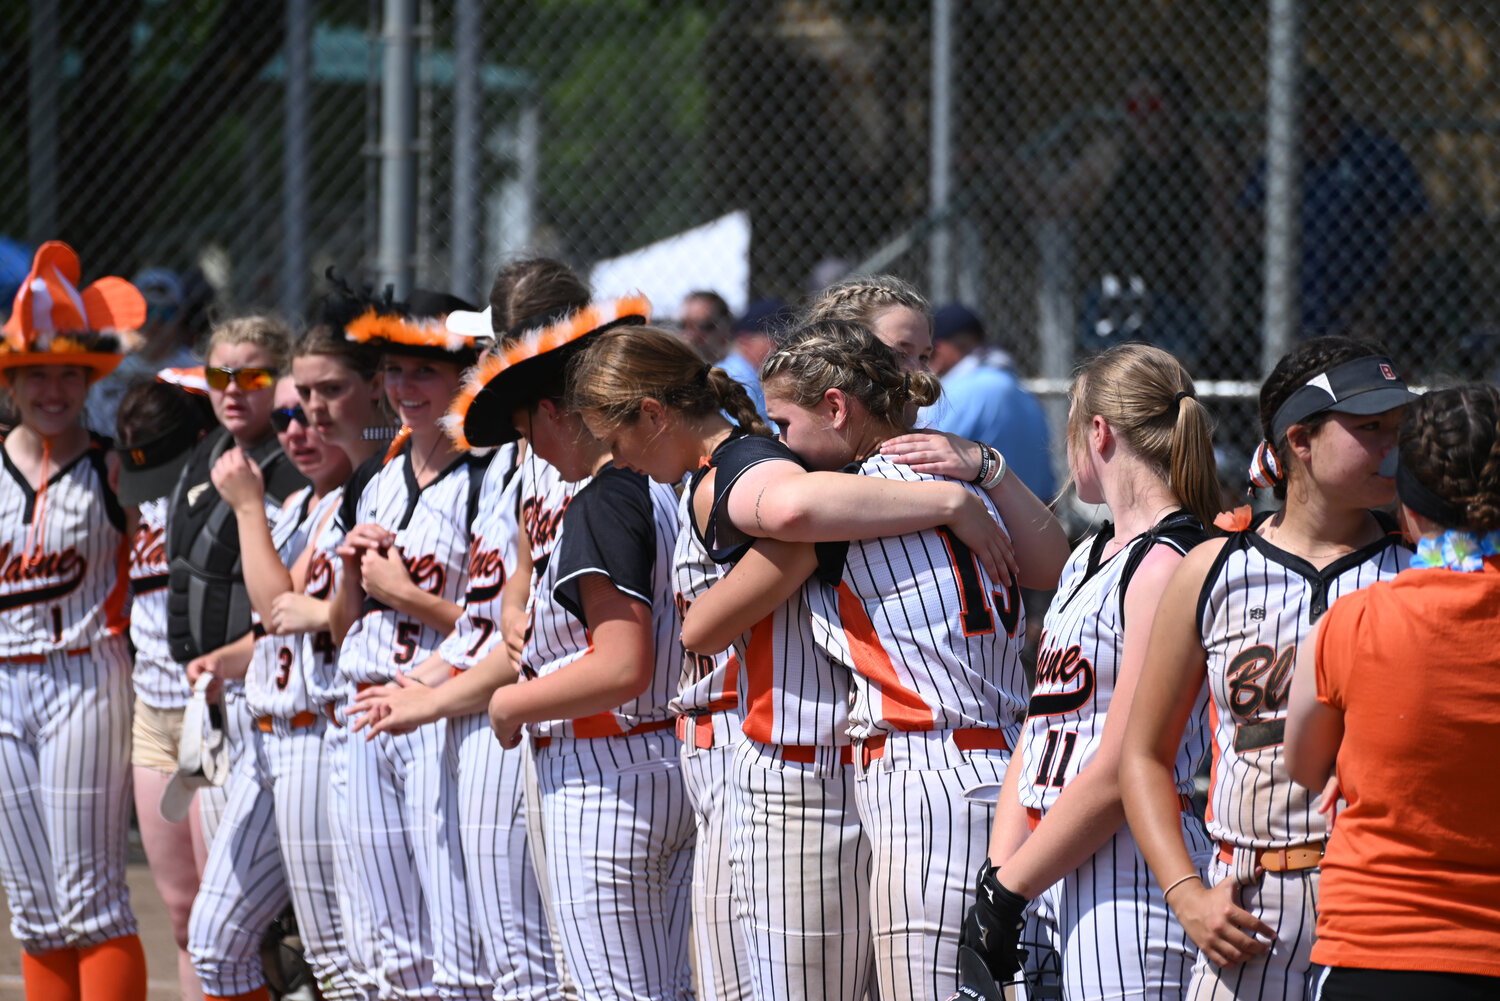 The Lady Borderites lost two games May 27 in the 1A state championships double-elimination bracket.